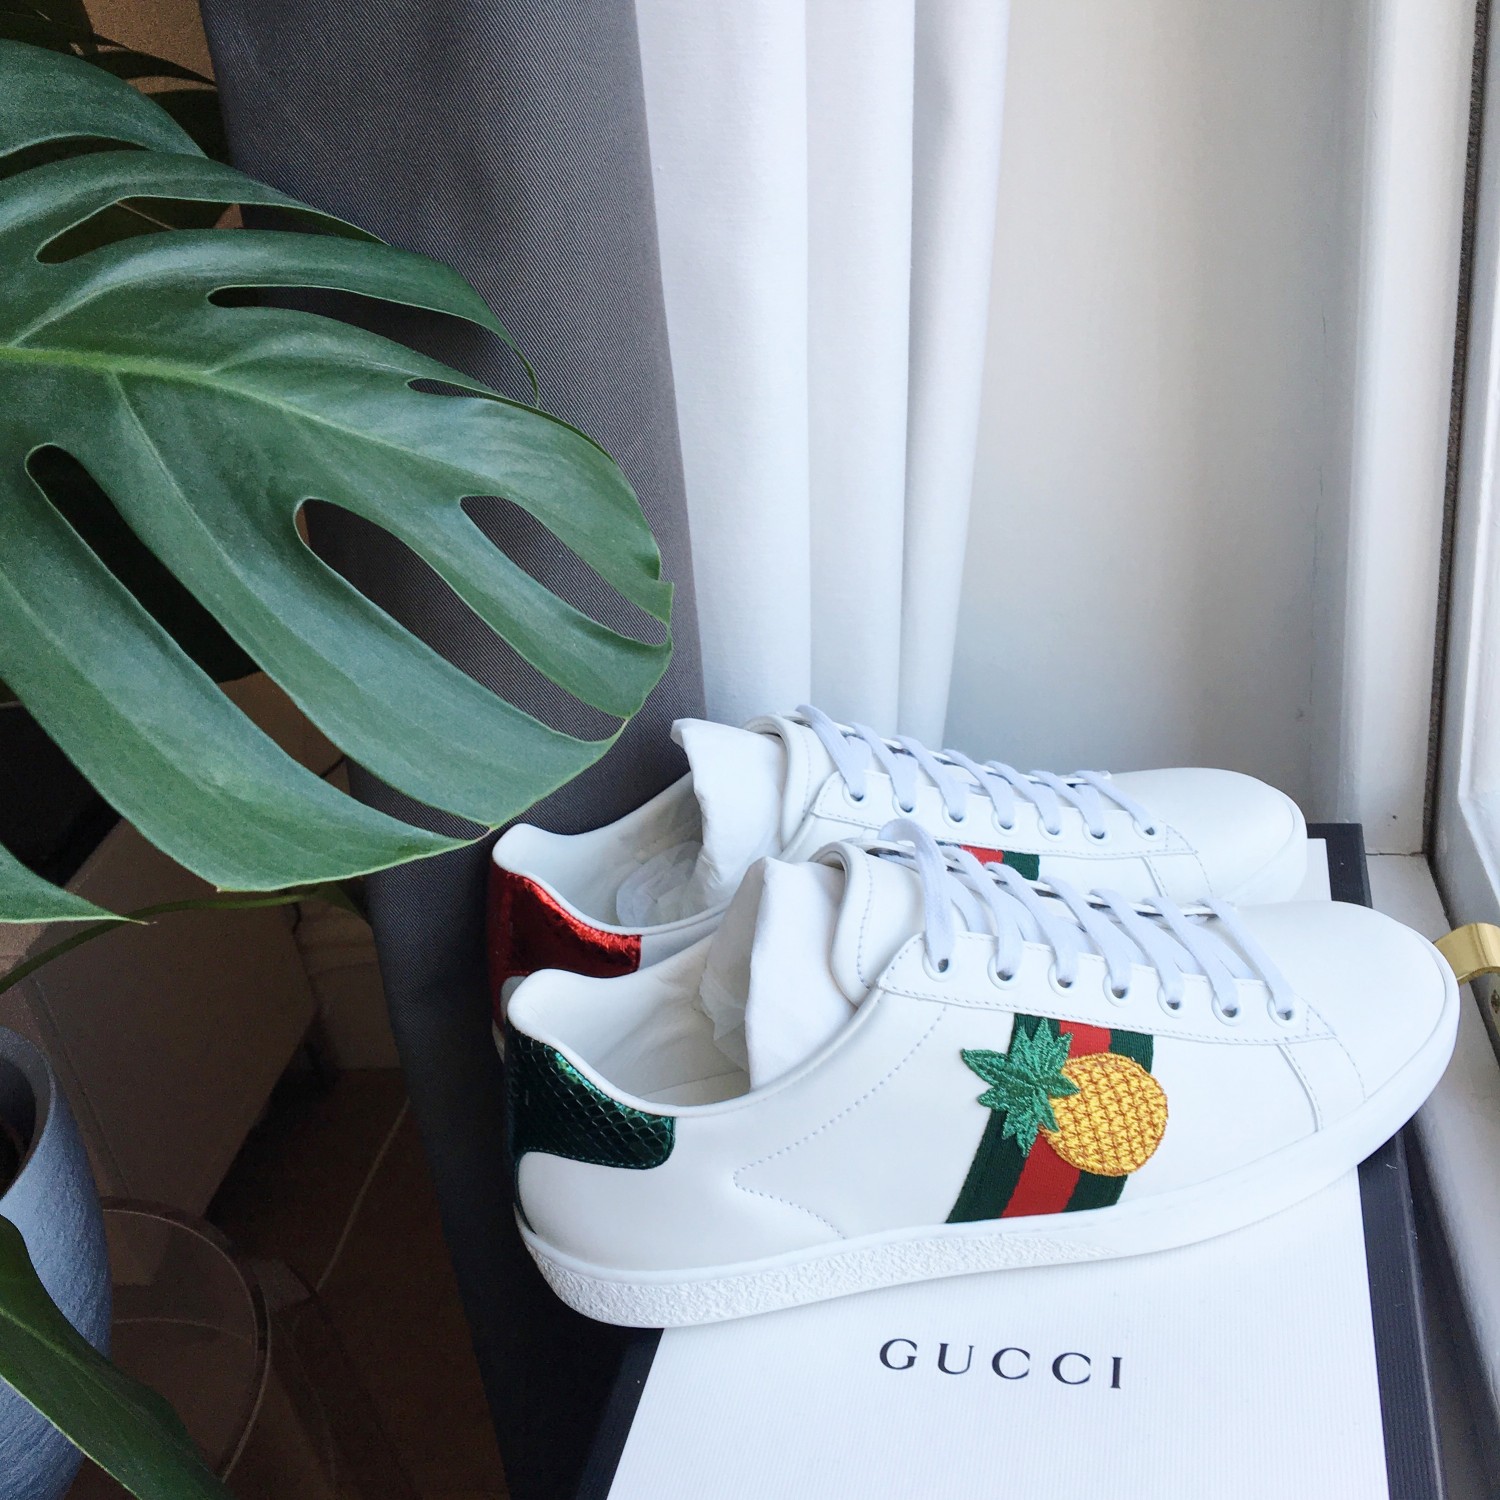 Confessions of a Gucci-holic | kategori Style by Josephine